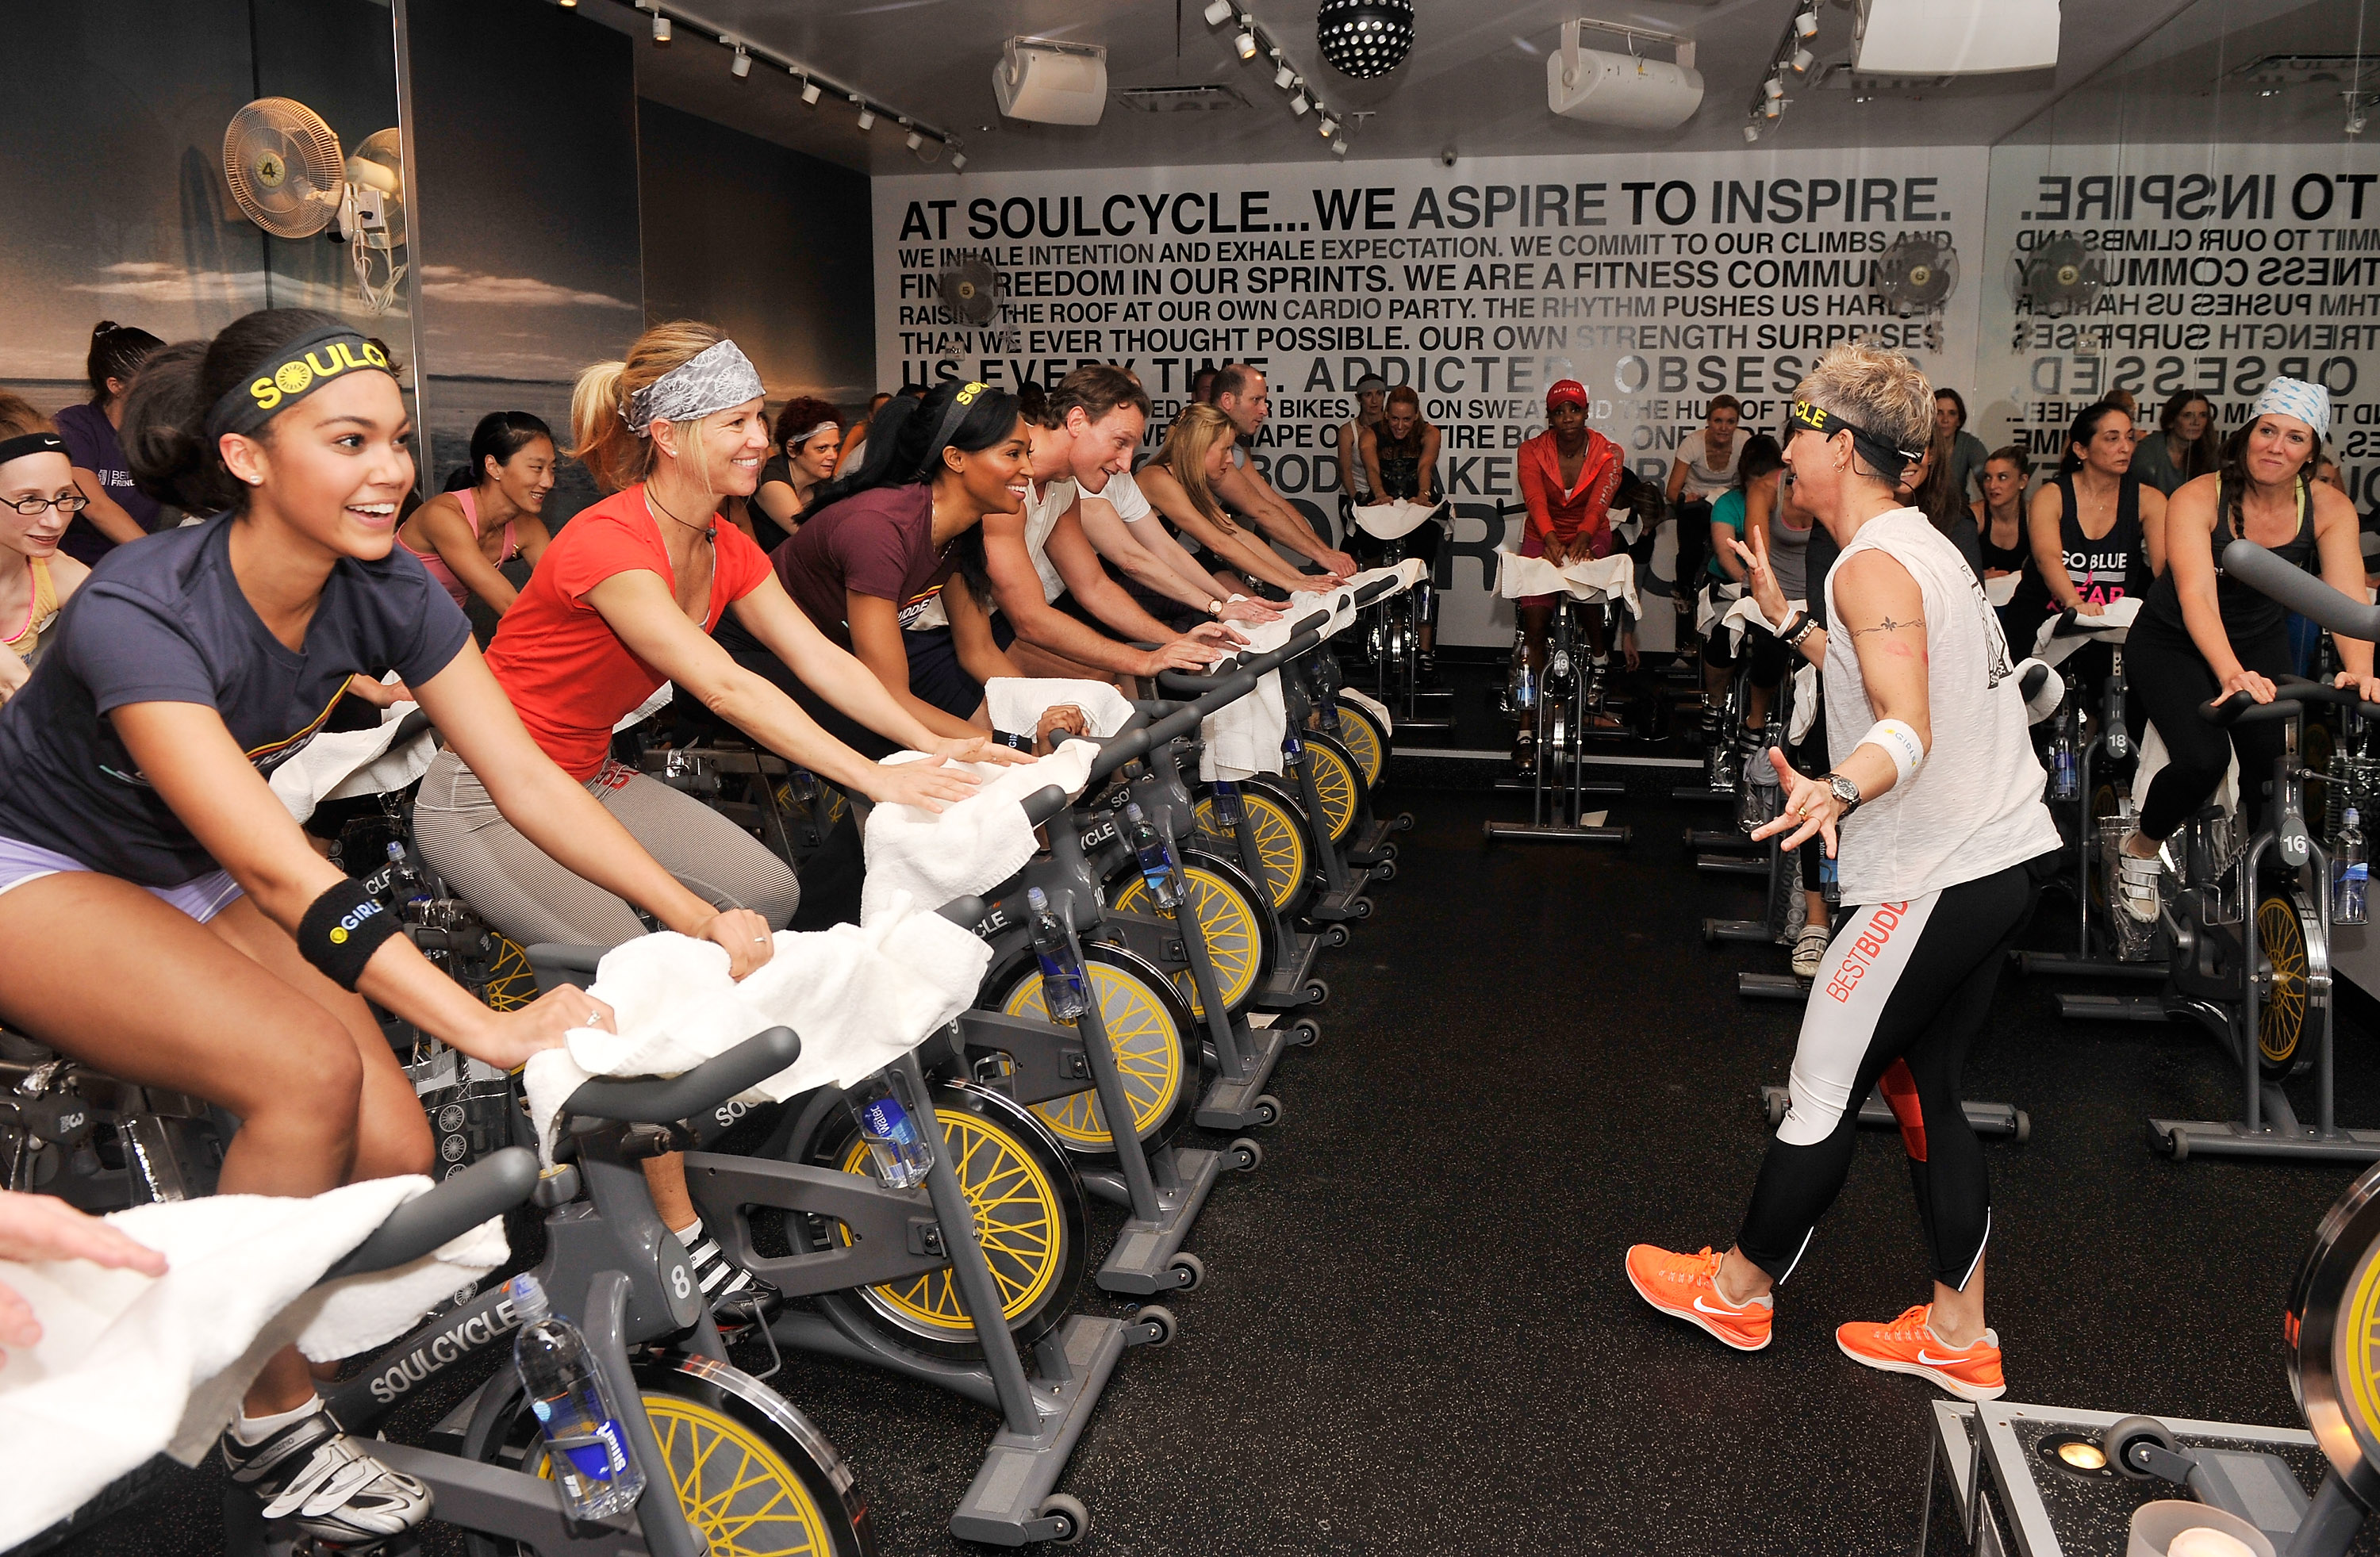 SoulCycle's "Ride With Soul" Best Buddies Benefit